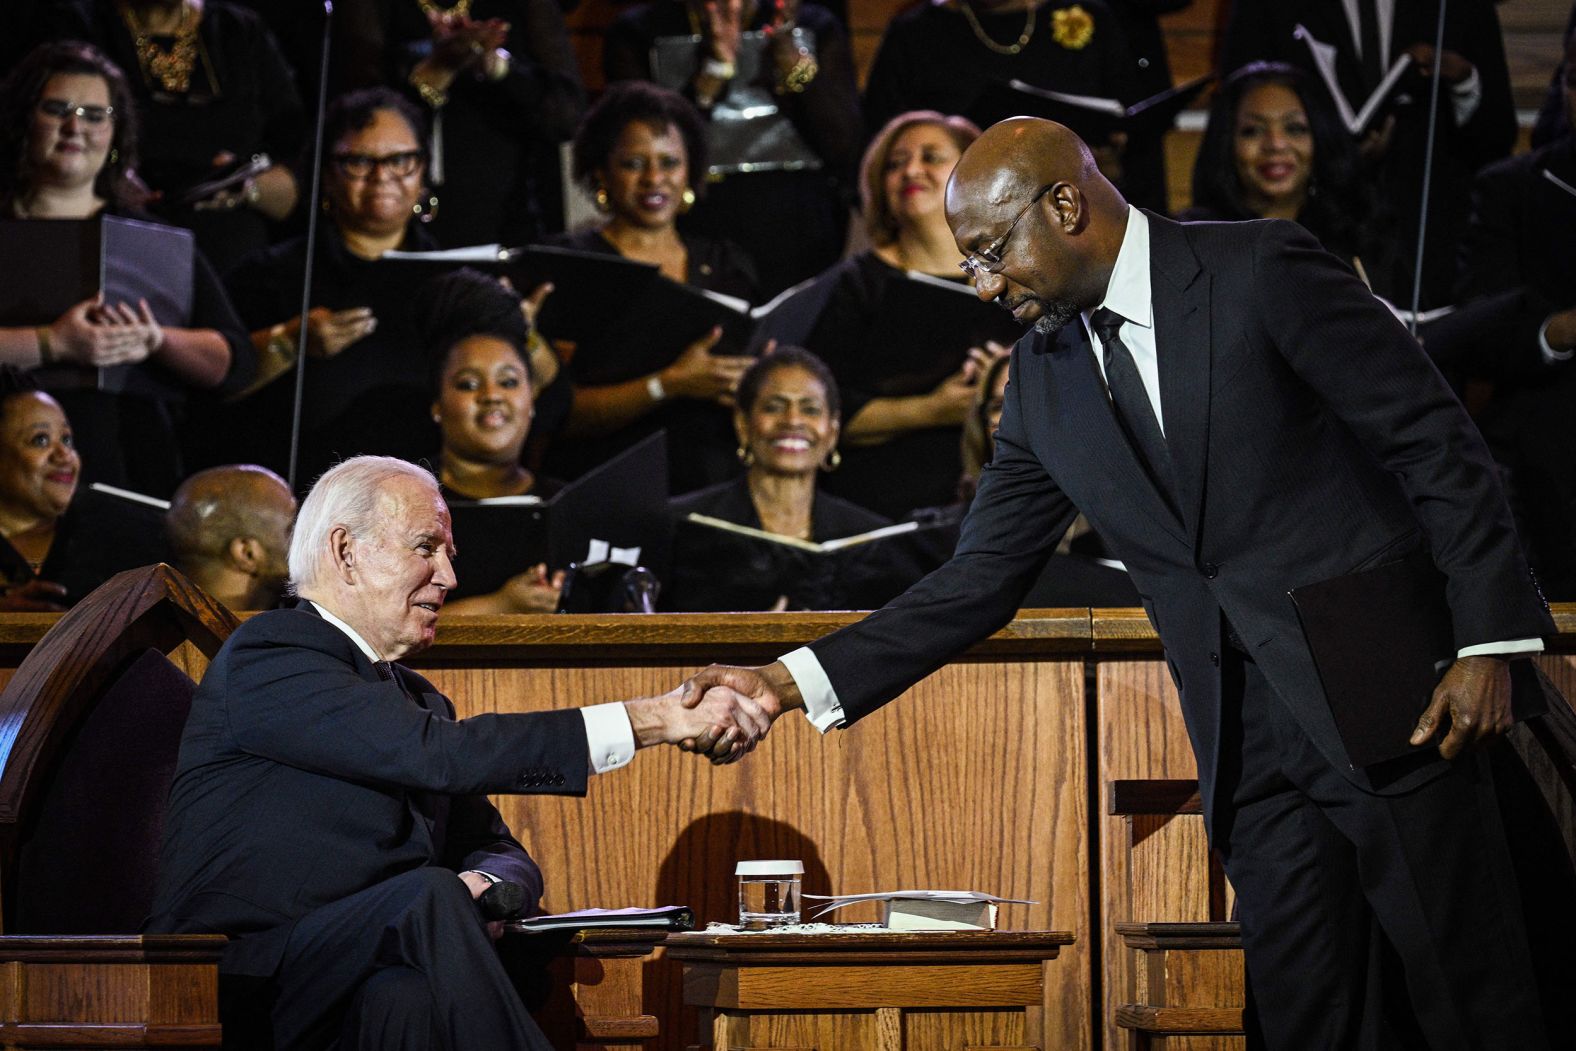 US Sen. Raphael Warnock, the pastor at Ebenezer Baptist Church, greets US President Joe Biden during a worship service in Atlanta, Georgia, on Sunday, January 15, the eve of Martin Luther King Jr. Day. King was co-pastor of the church from 1960 until his assassination in 1968. Biden became the first sitting president to <a href="index.php?page=&url=https%3A%2F%2Fwww.cnn.com%2F2023%2F01%2F15%2Fpolitics%2Fbiden-mlk-speech-atlanta-democracy-voting%2Findex.html" target="_blank">deliver a Sunday sermon</a> from the historic church.